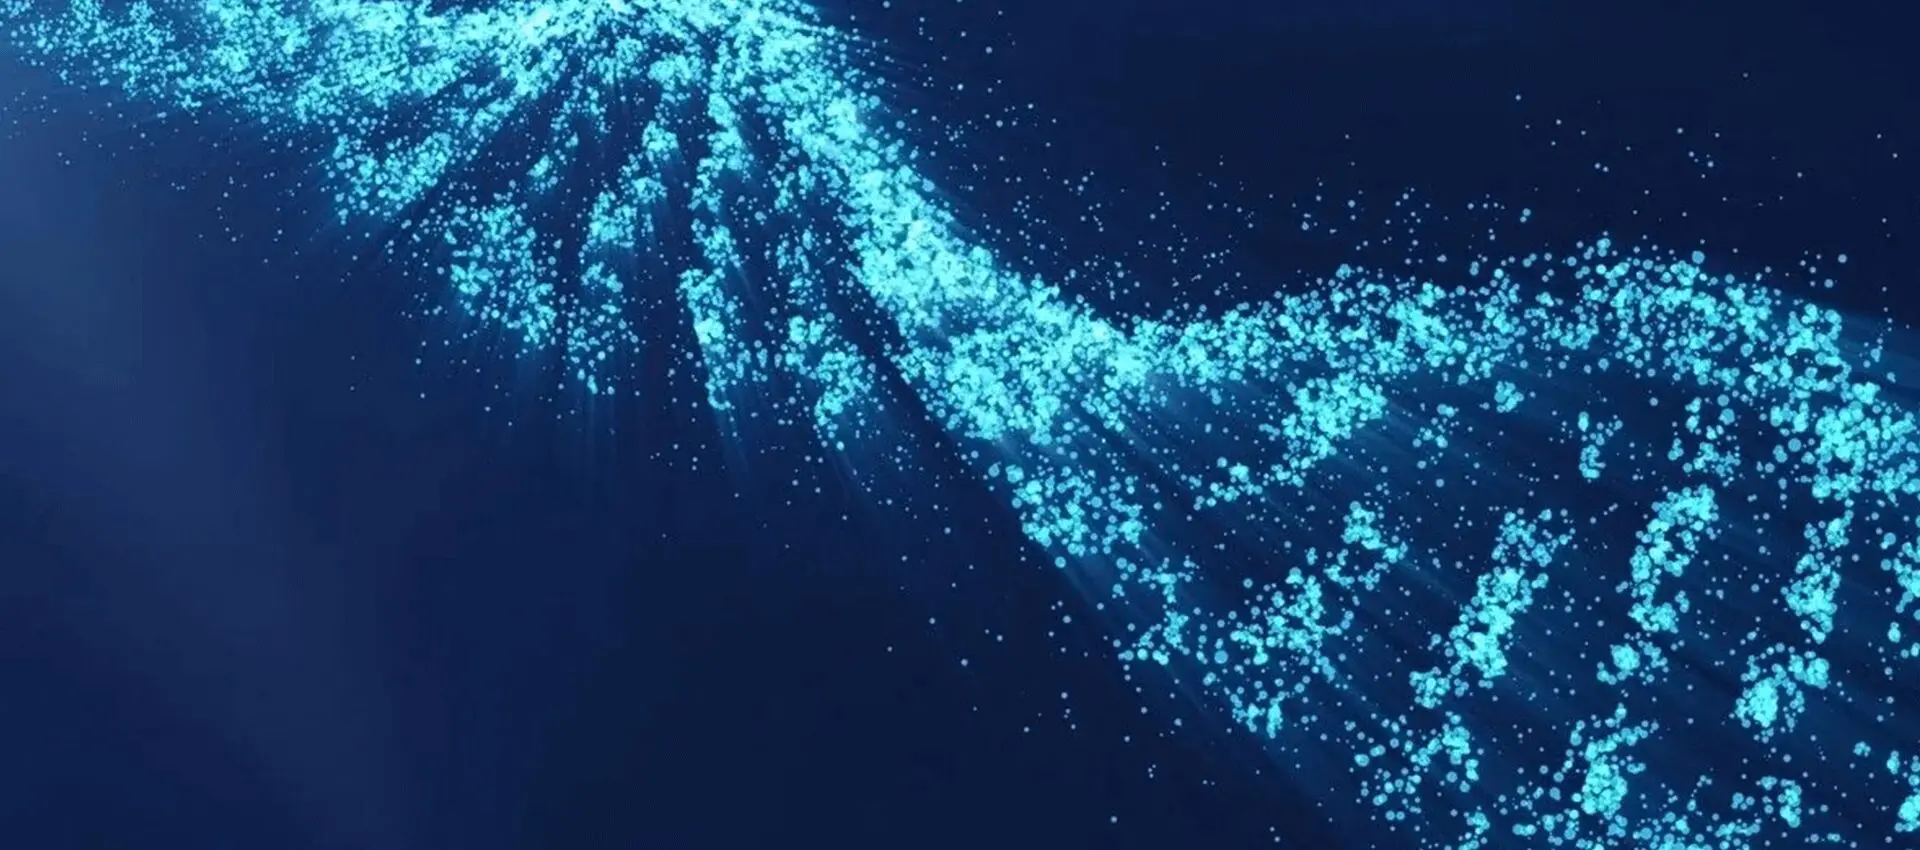 A digital animation depicting particles of light swirling and forming a glowing, dynamic wave pattern on a dark blue background.